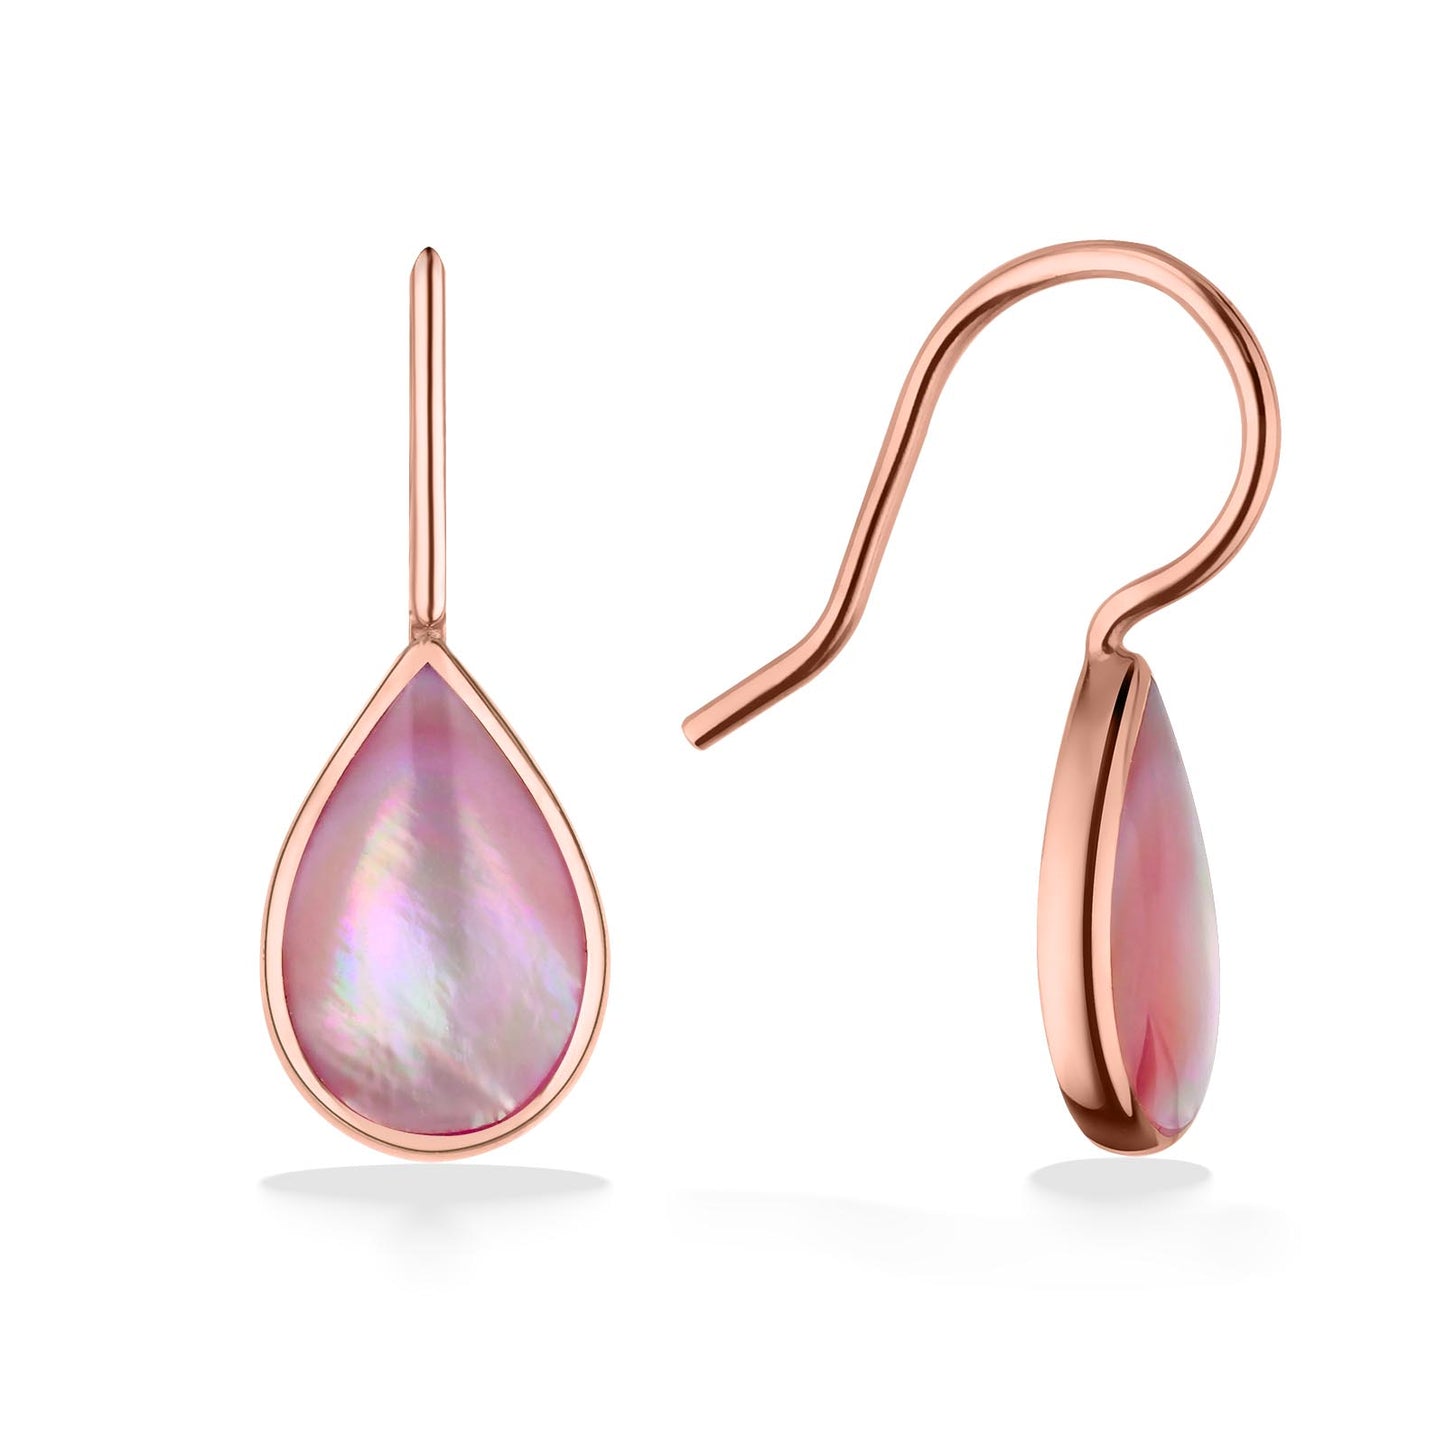 761730 - 14K Rose Gold -  Kabana Pear Shaped Inlay French Wire Earrings